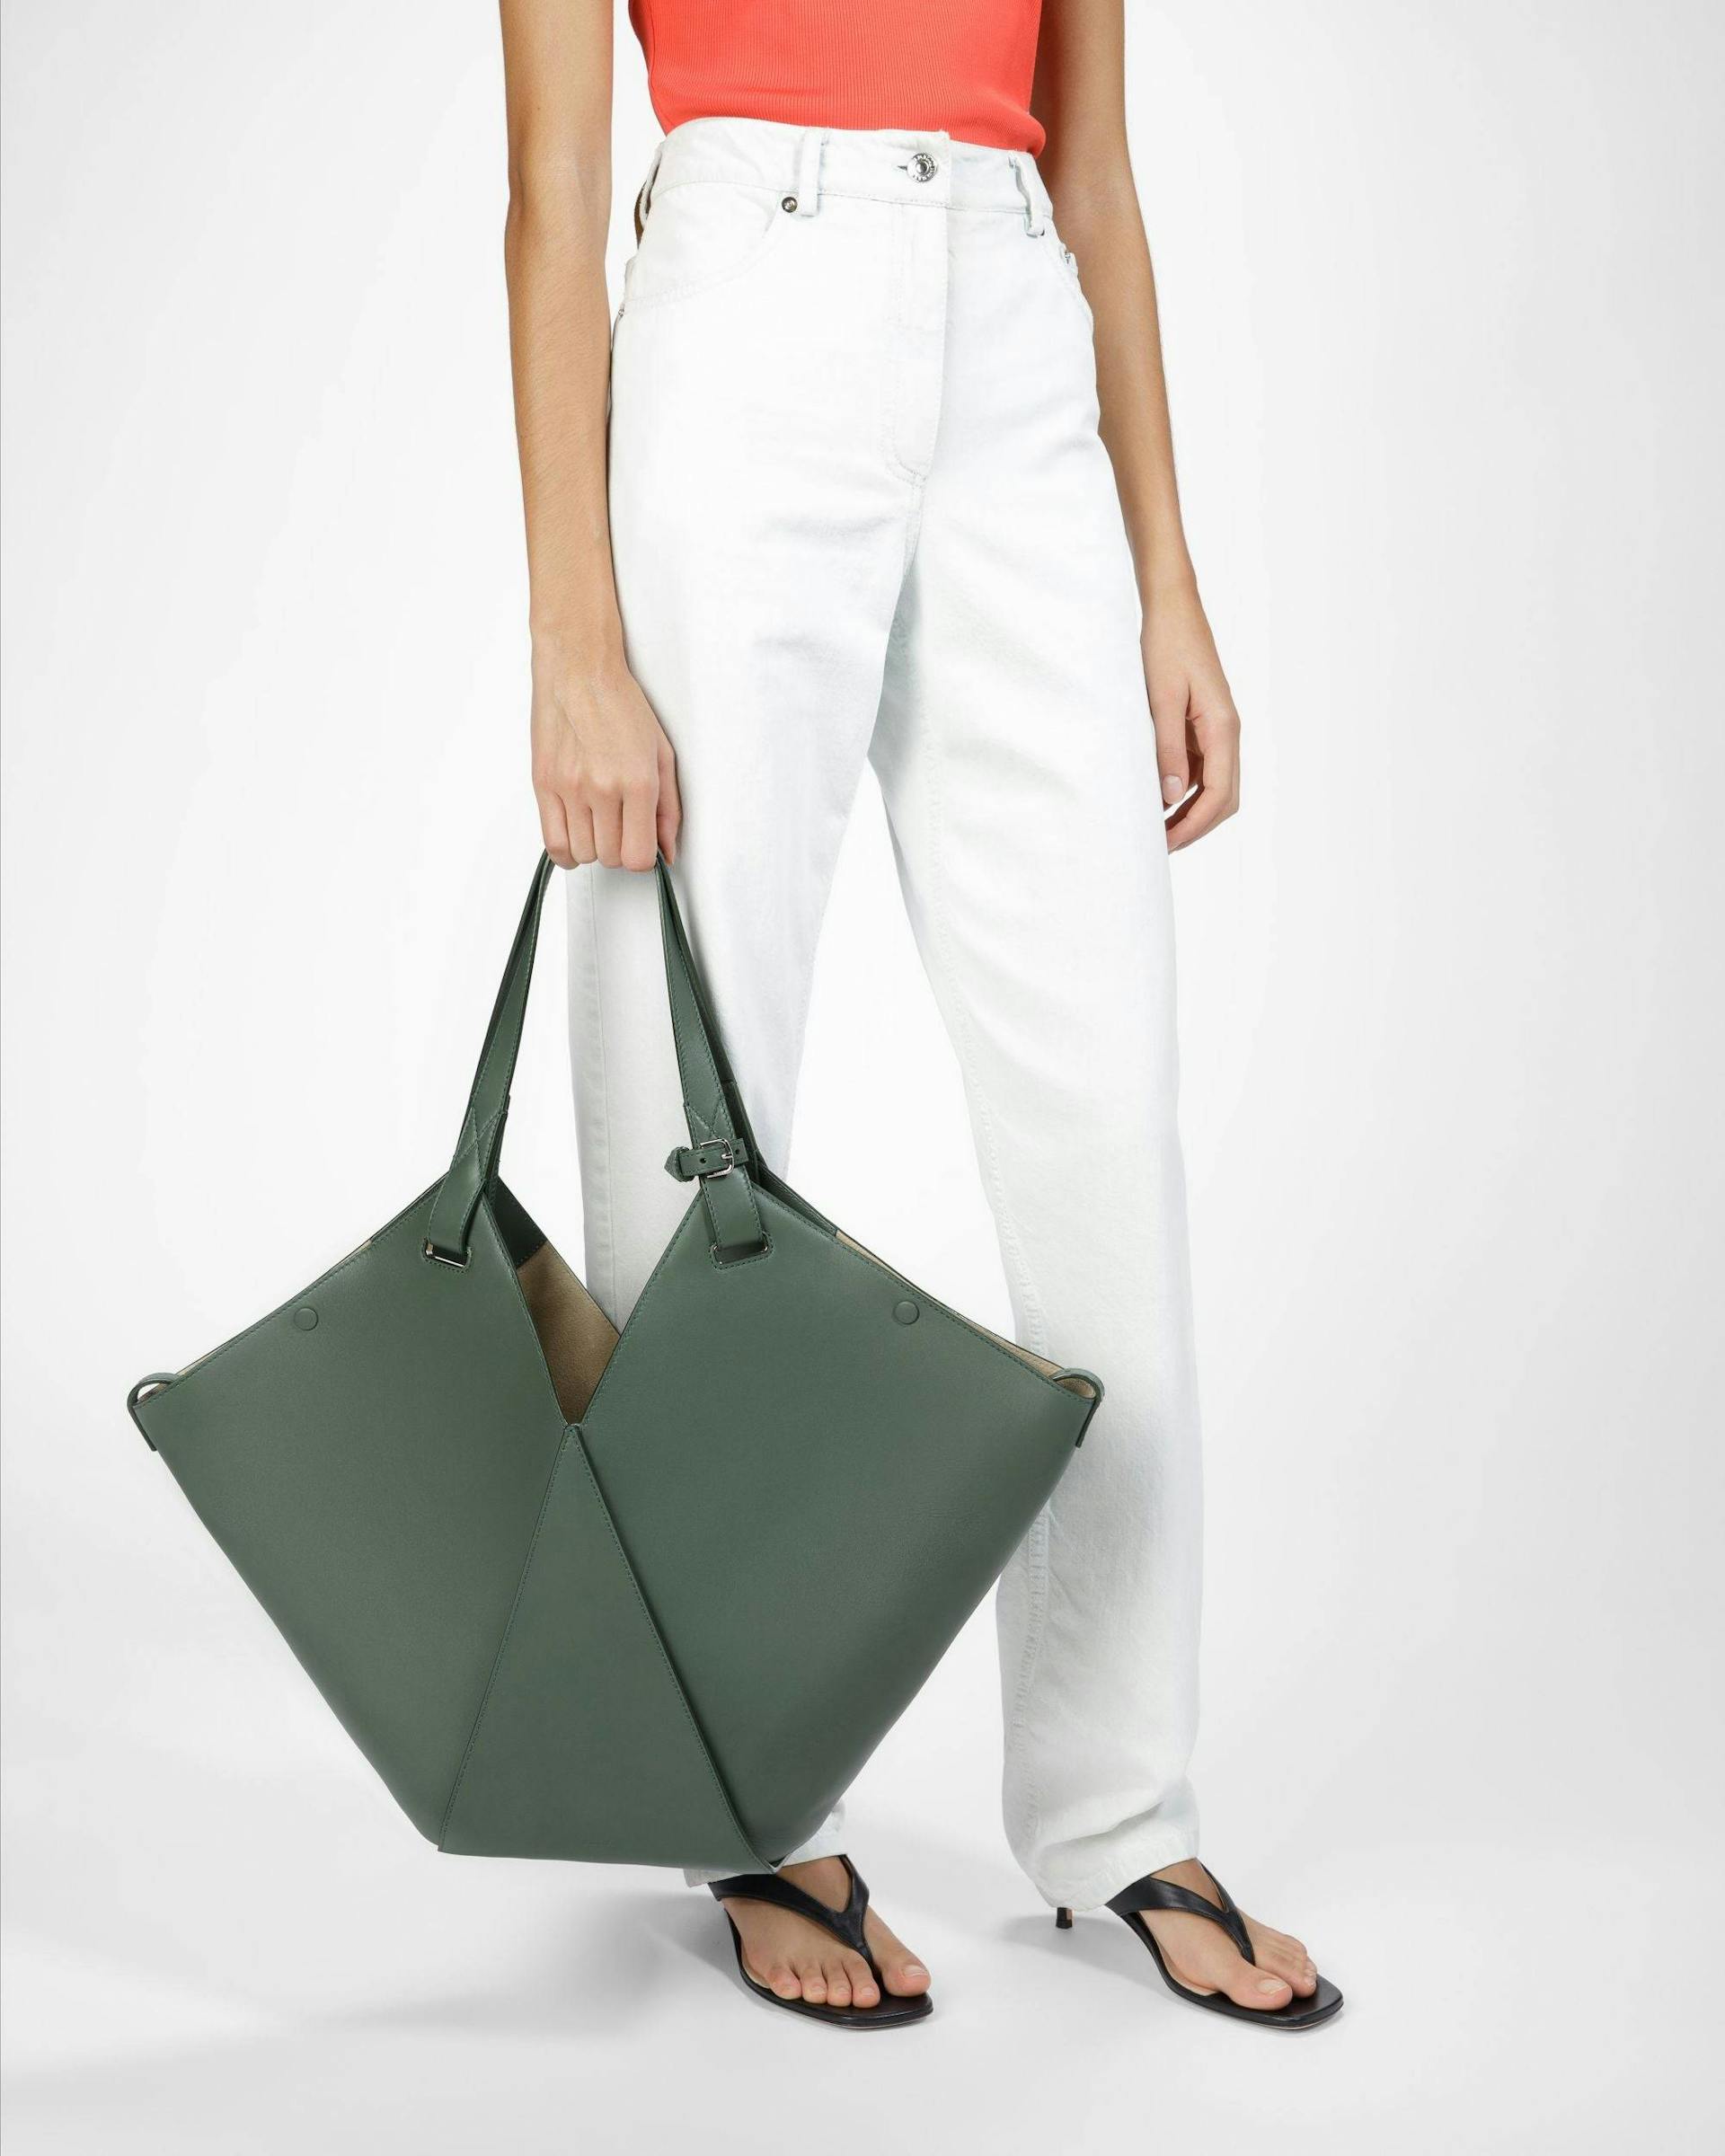 Ahria Leather Tote In Sage - Women's - Bally - 02